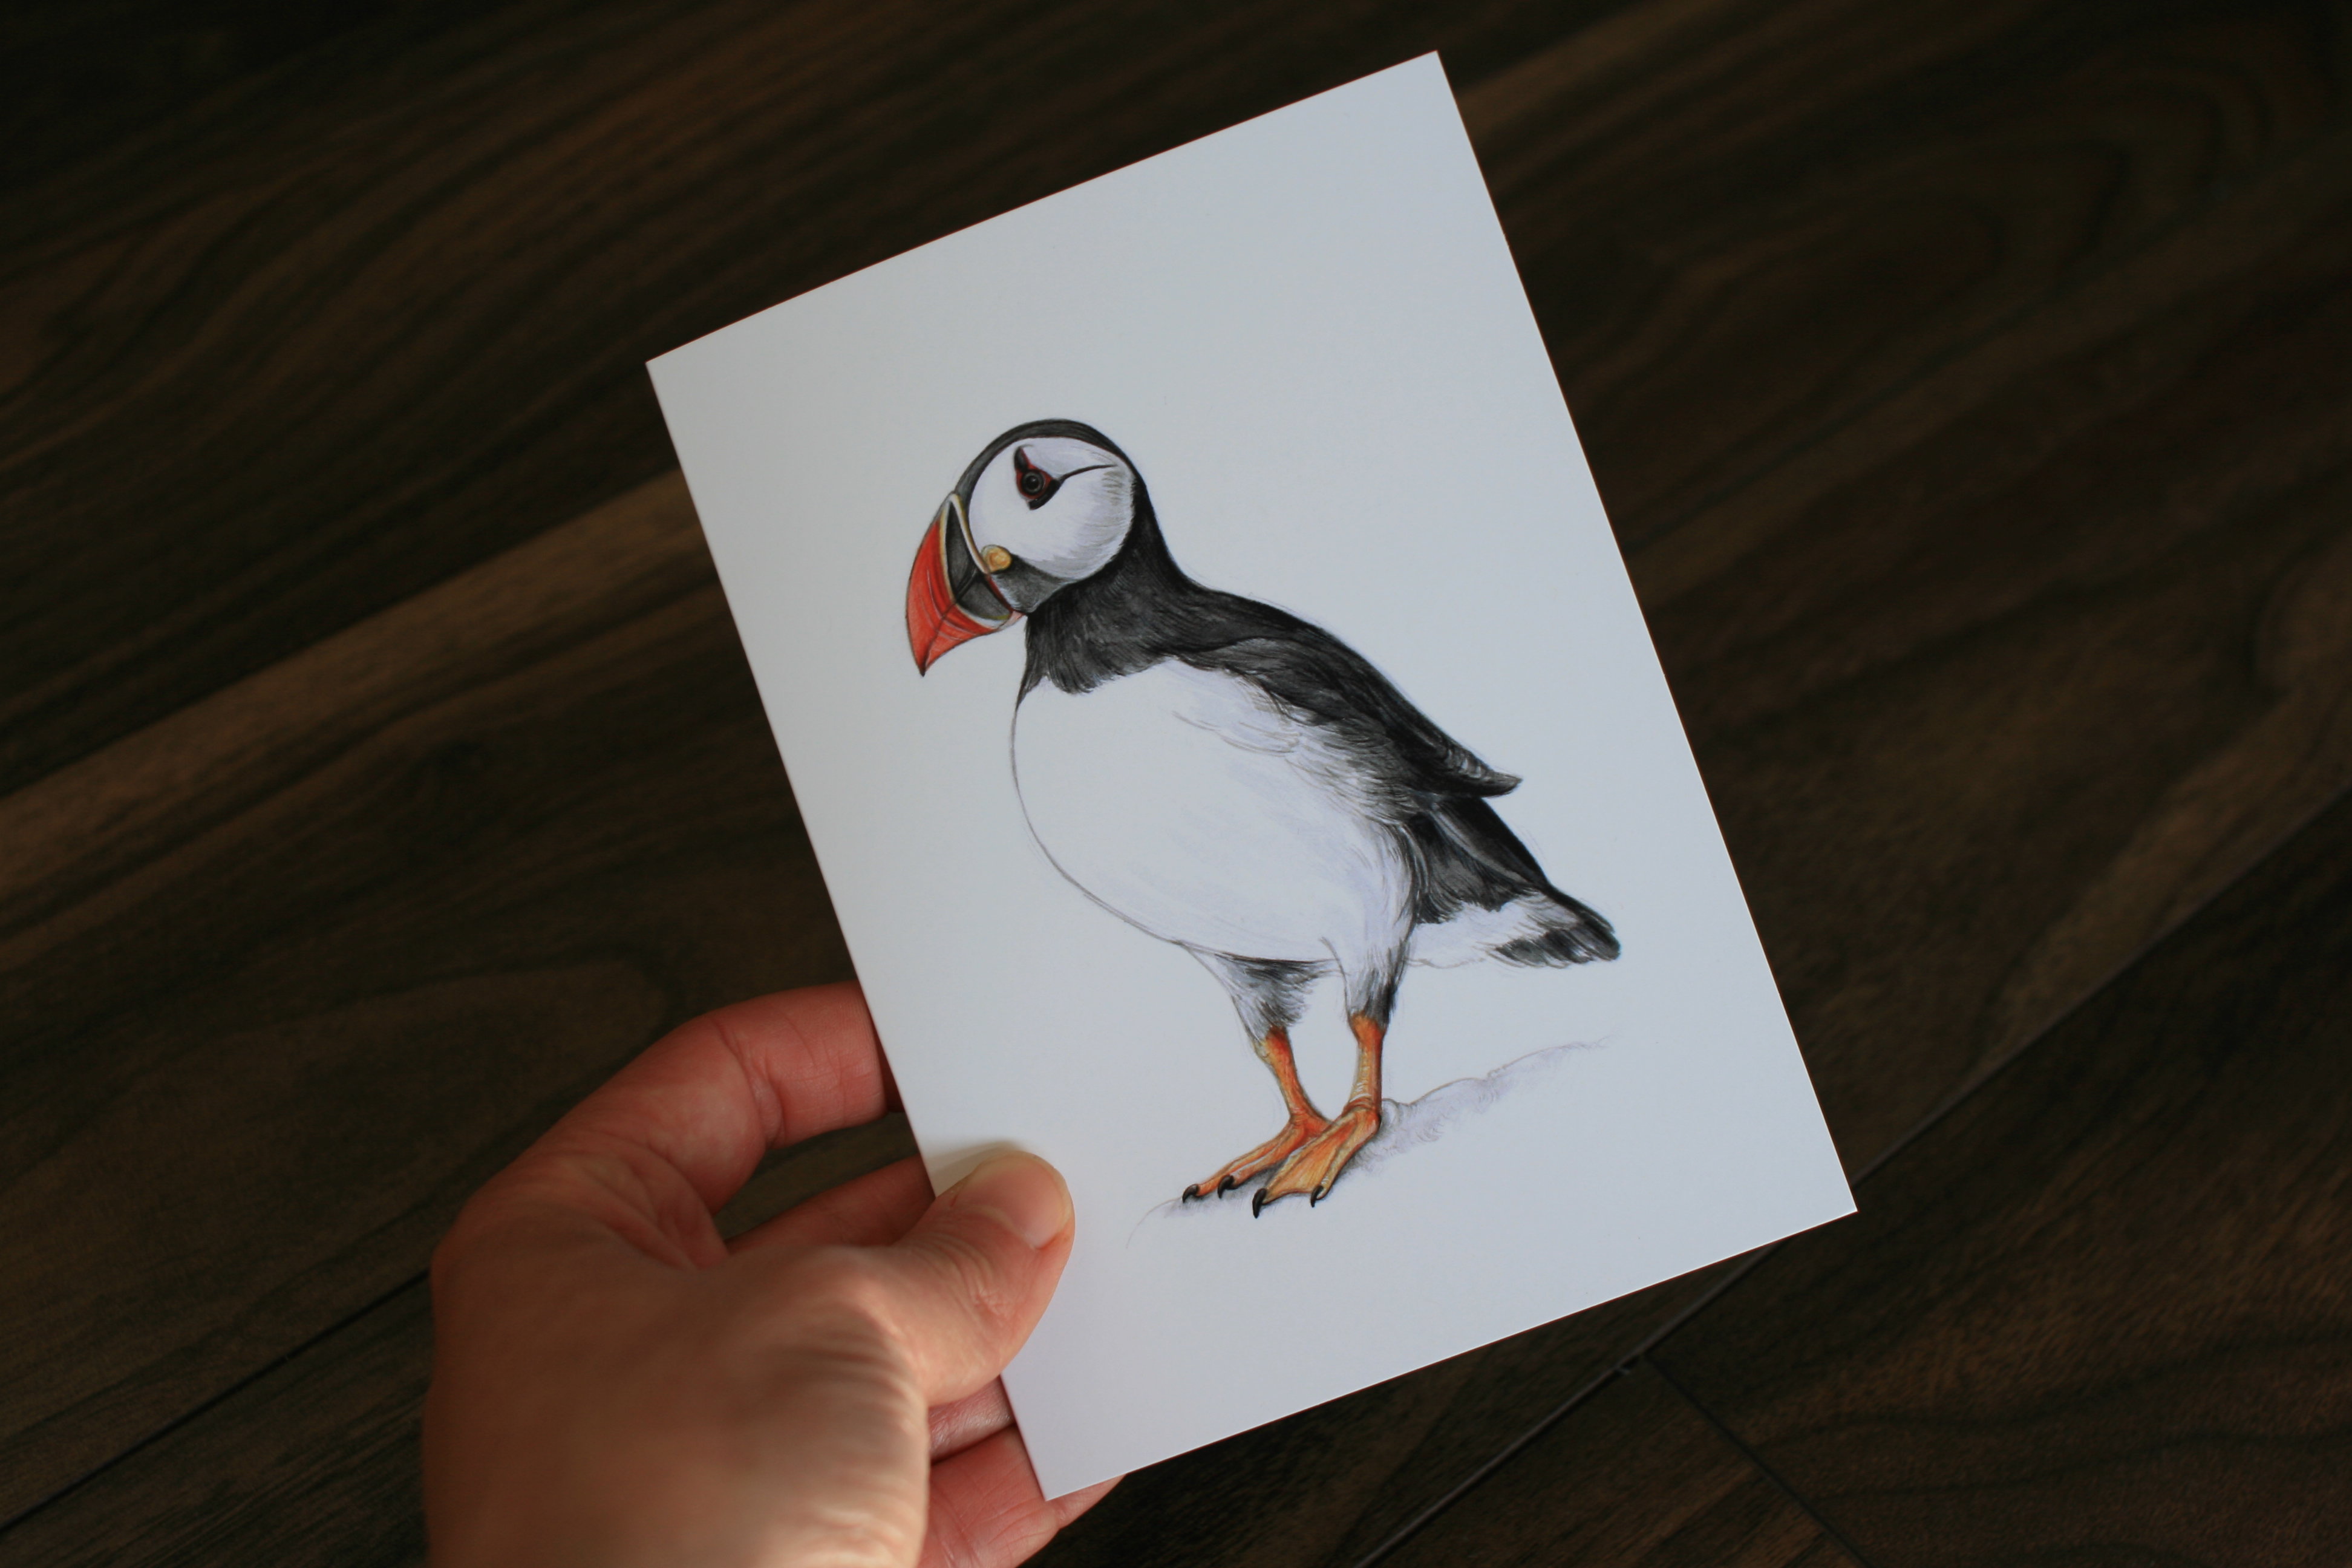 CARD – Wildlife illustration of a puffin, as featured in 'Dr Hibernica Finch’s C